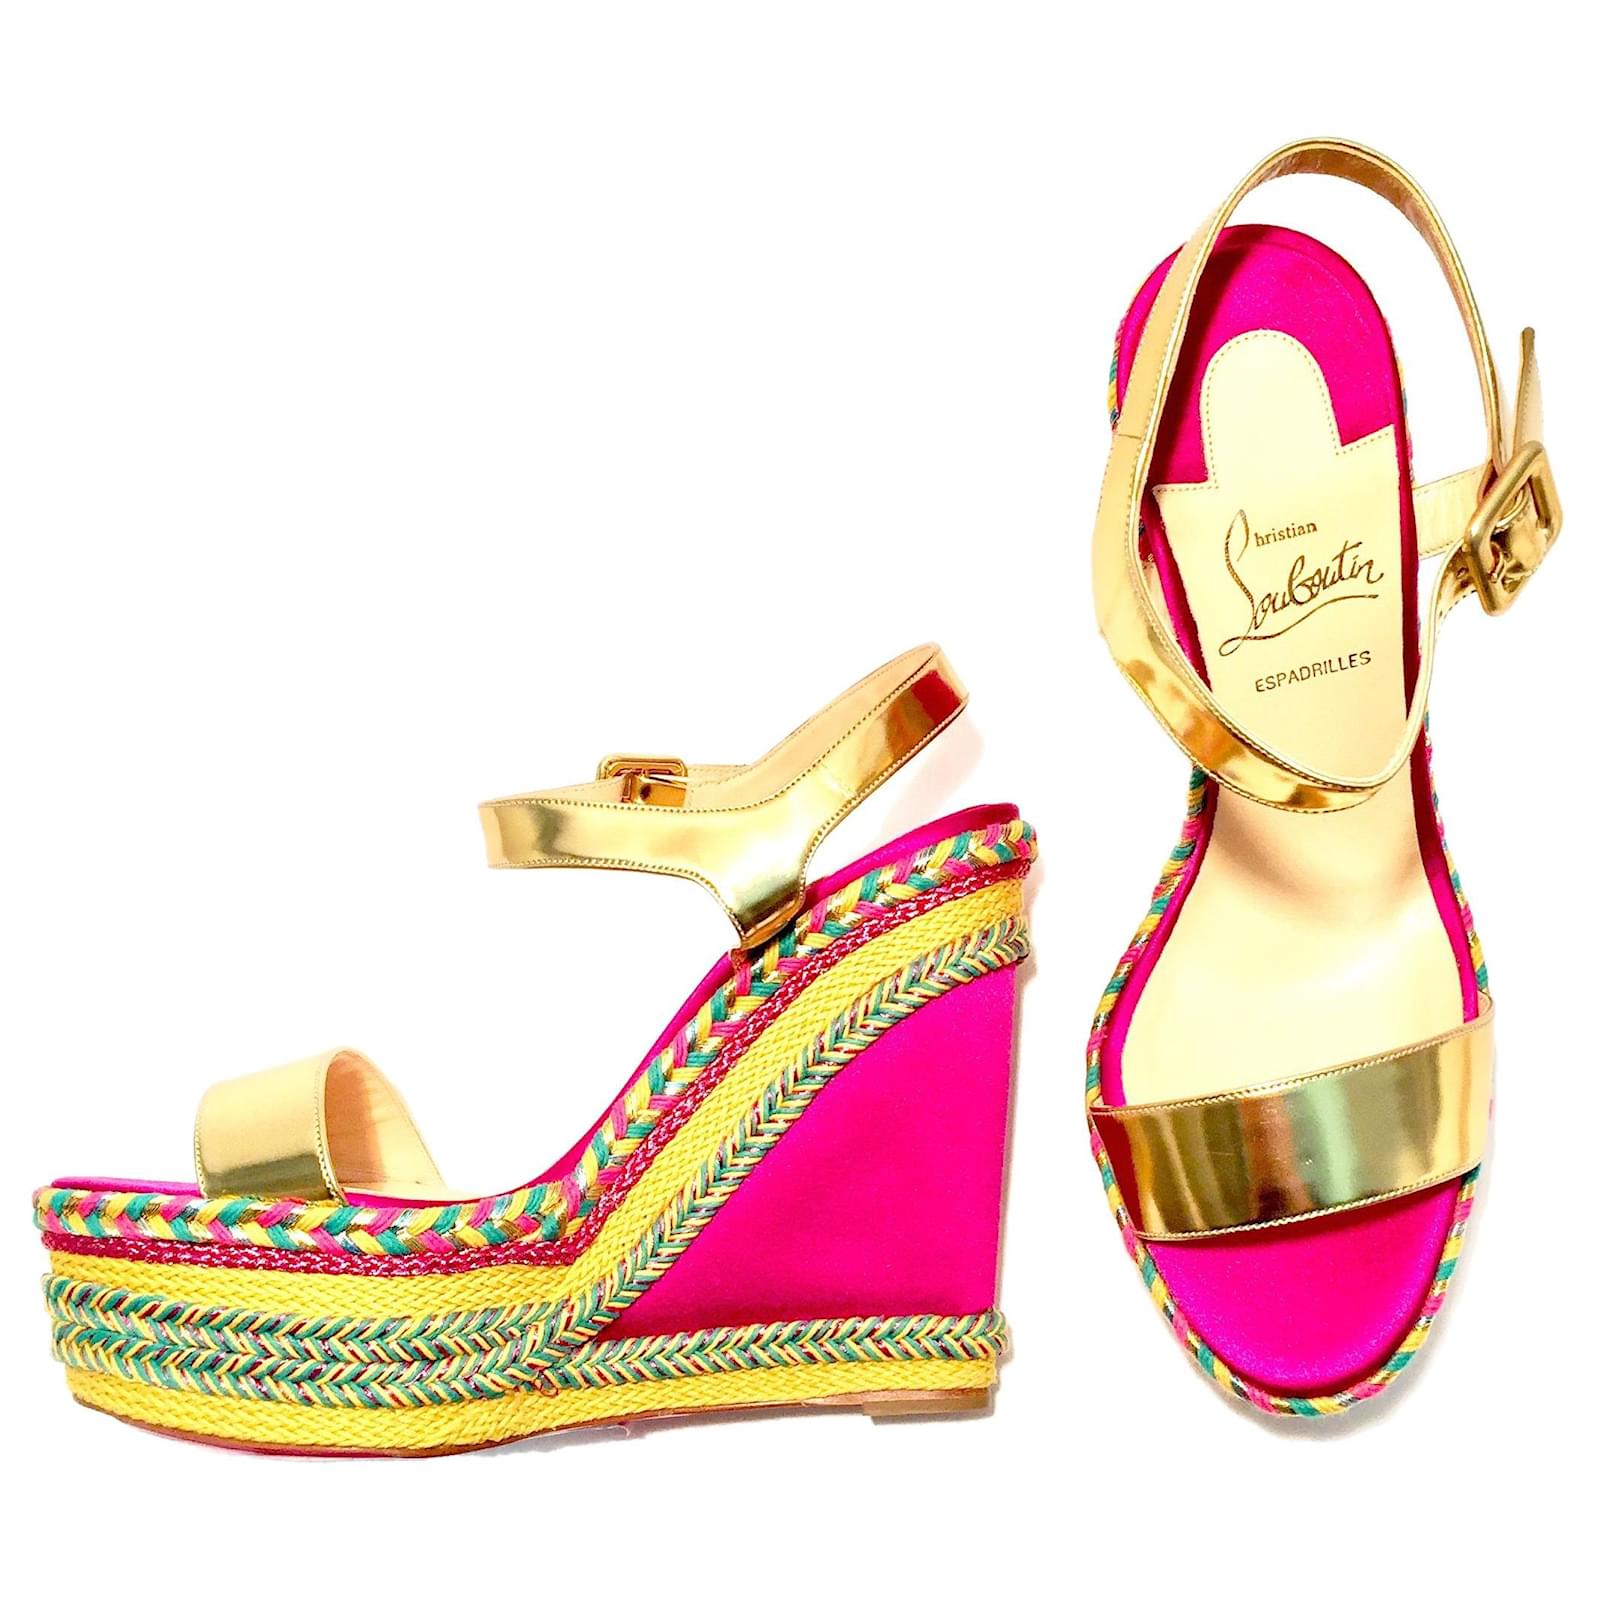 Christian Louboutin Zeppa Chick Wedge Sandals 85 - Pink - 37